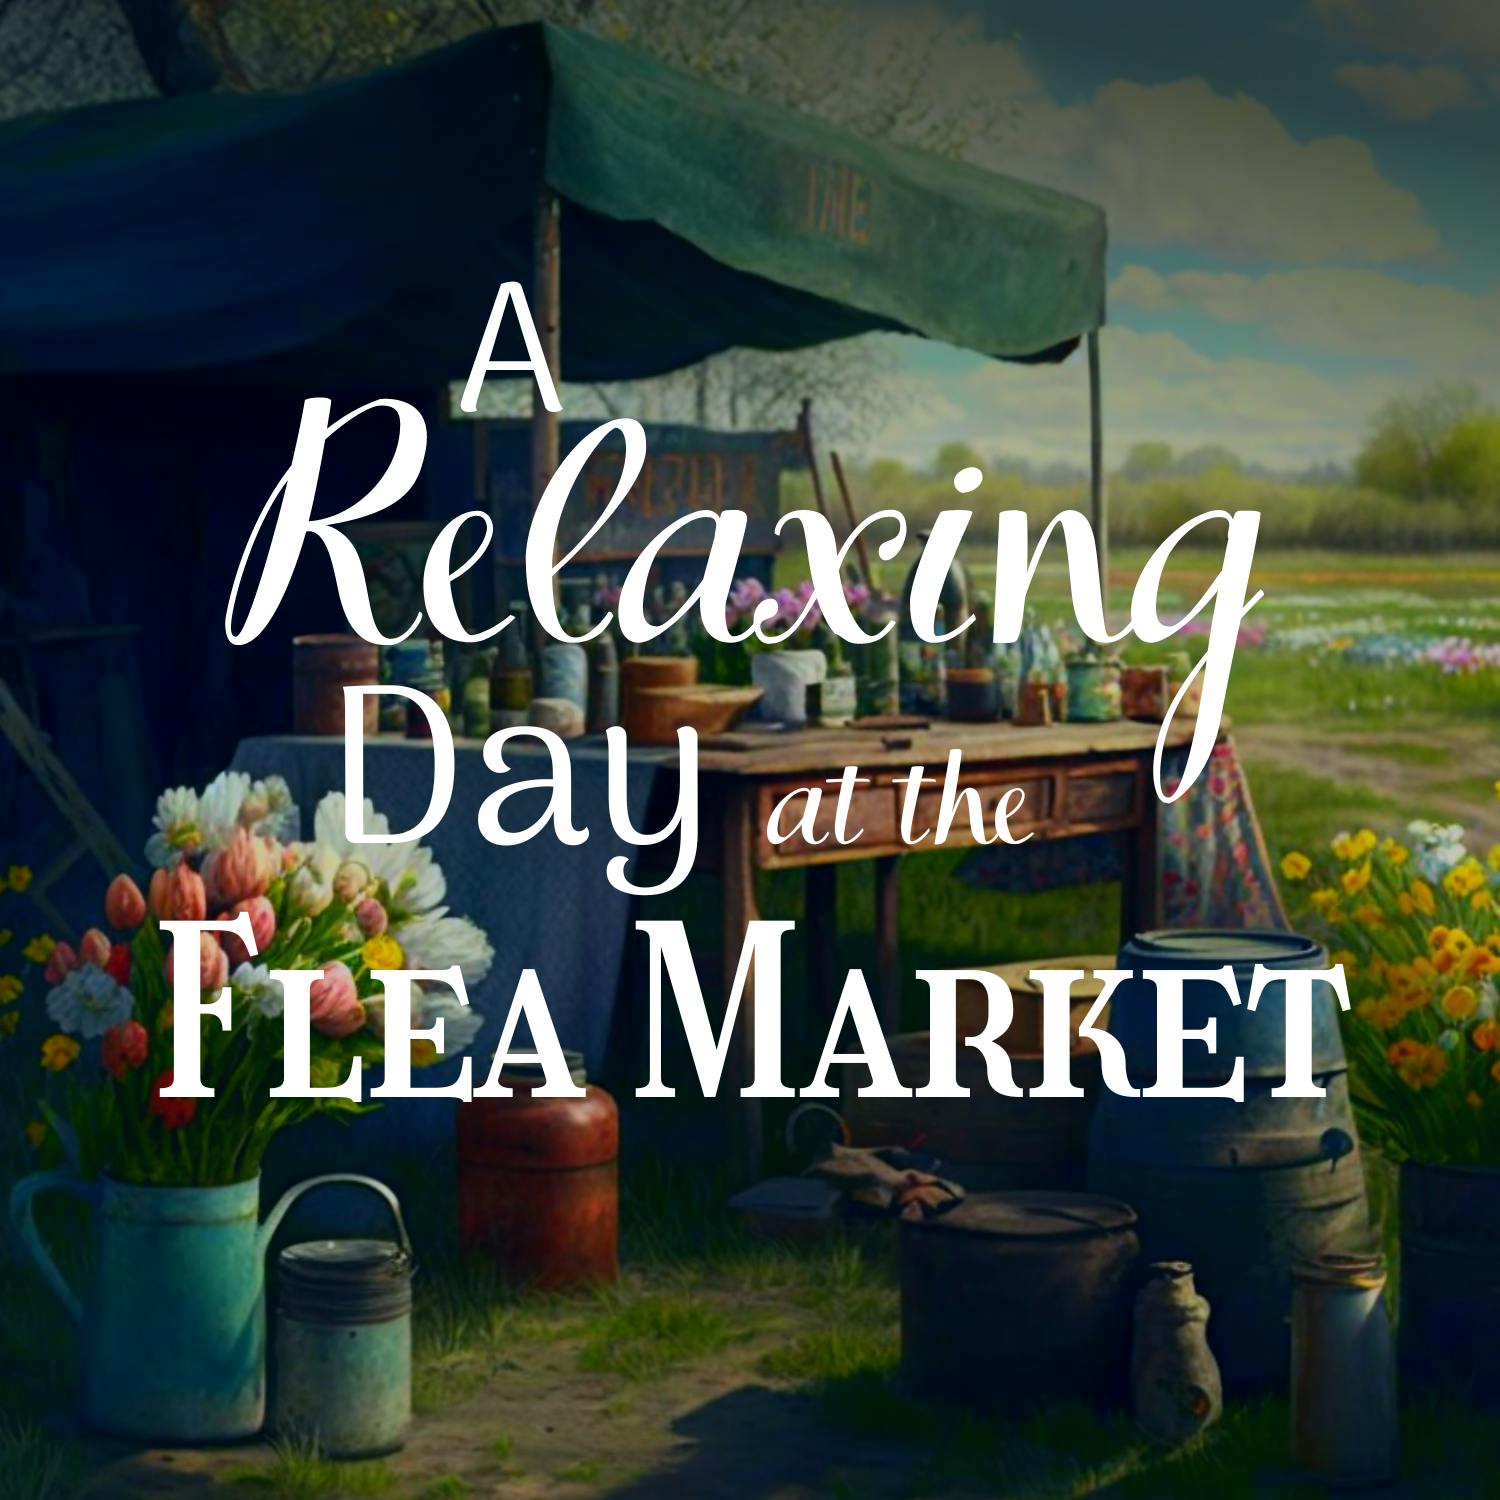 A Relaxing Day at the Flea Market